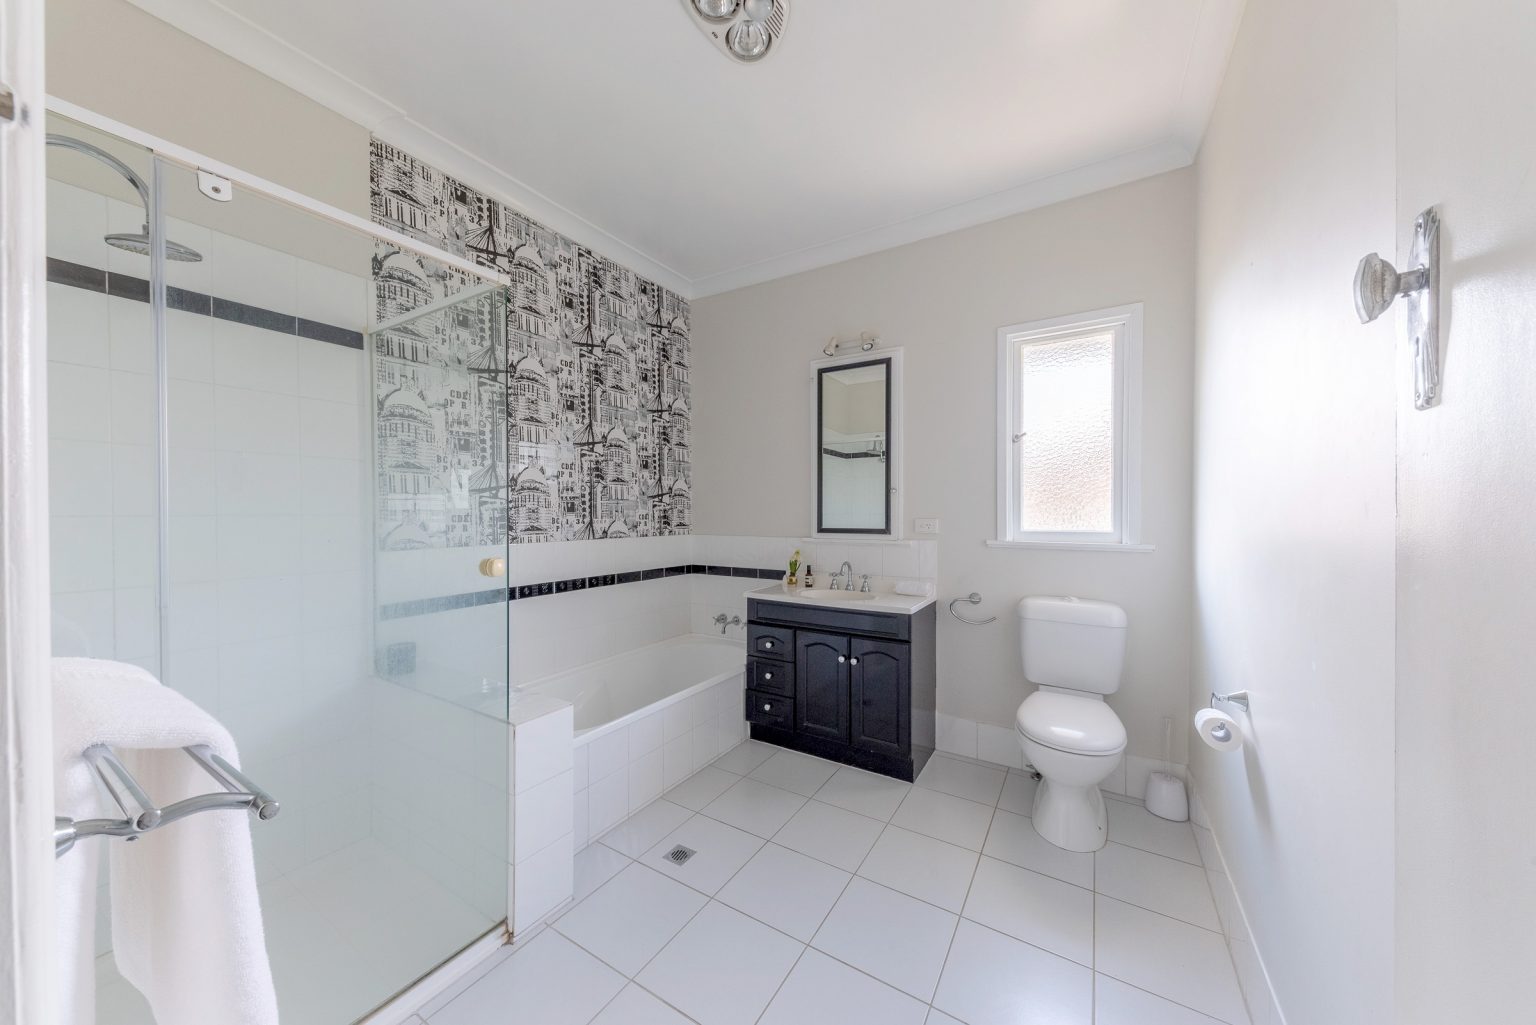 Real Estate Airbnb property photos photography Gold Coast